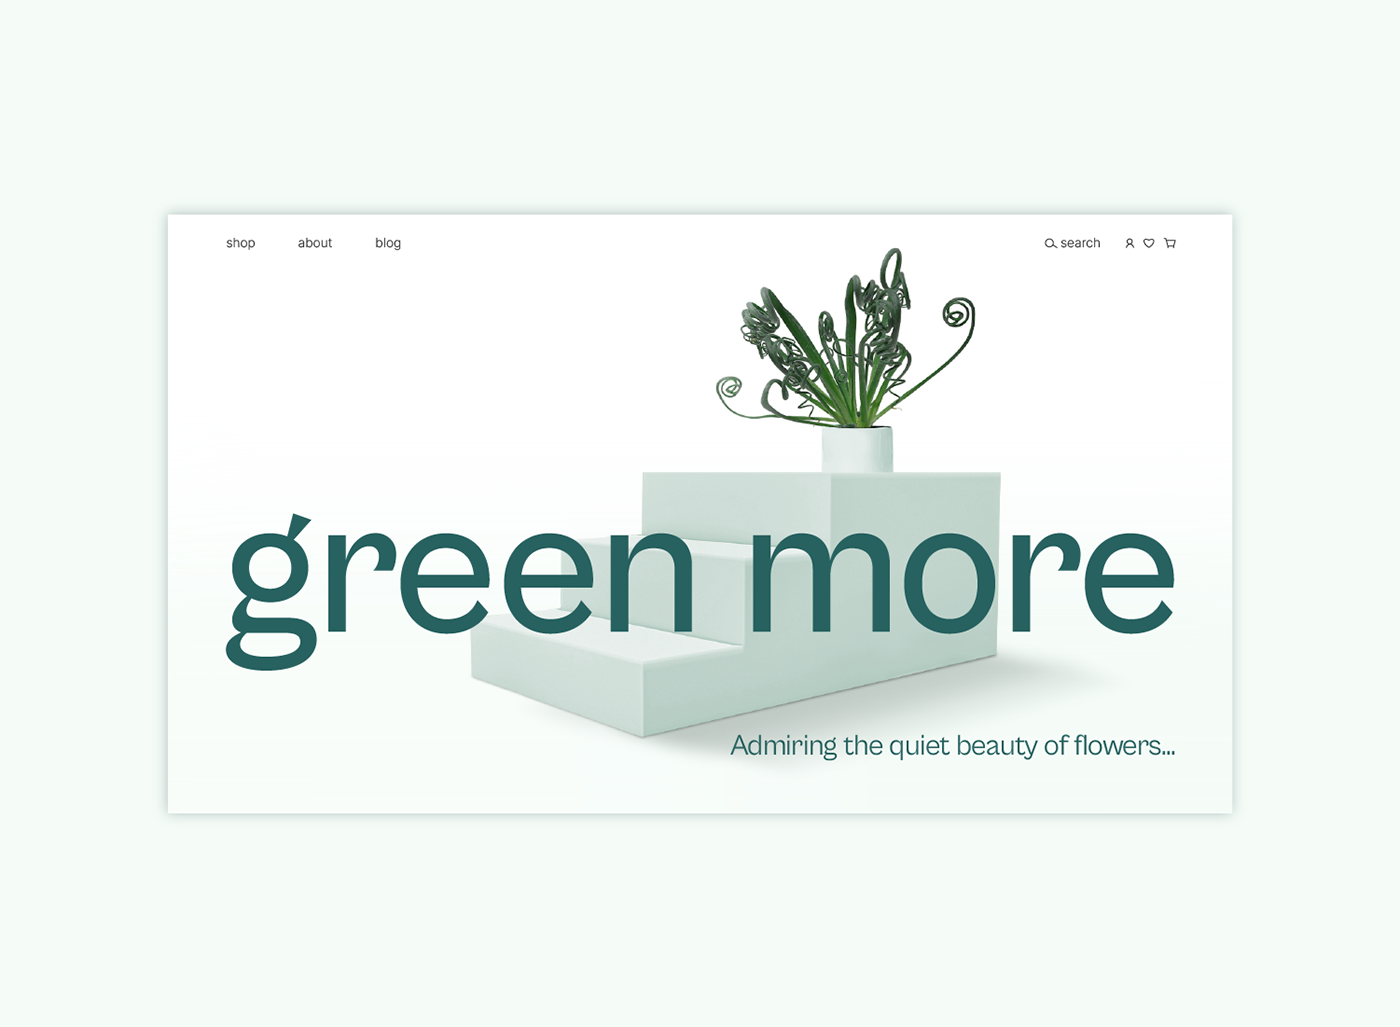 The logo and corporate identity of a houseplant shop.